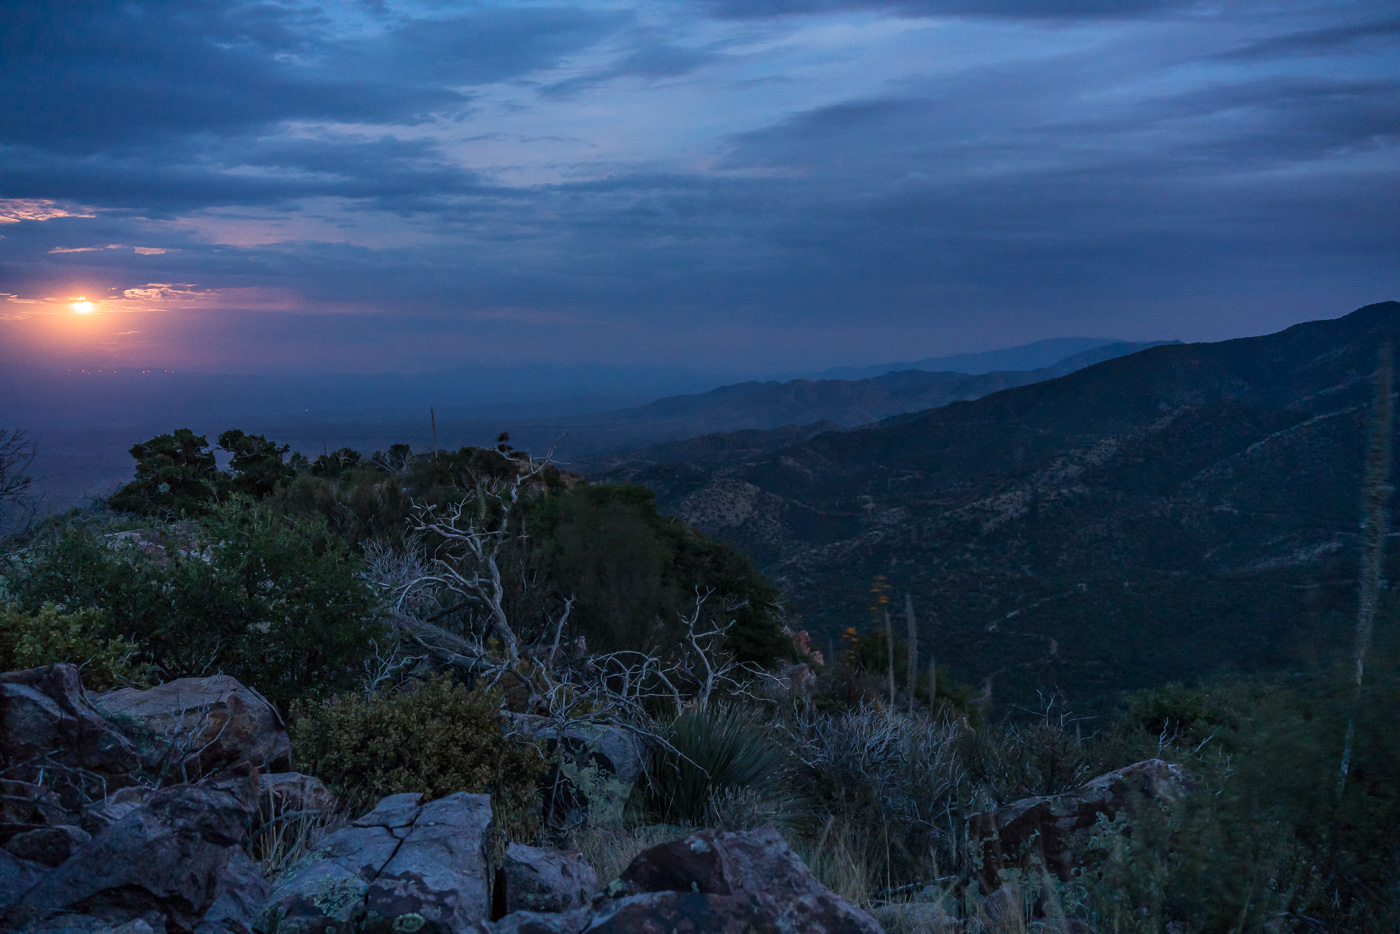 Watching the moon rise over the San Pedro Valley from Apache Peak. July 2017.